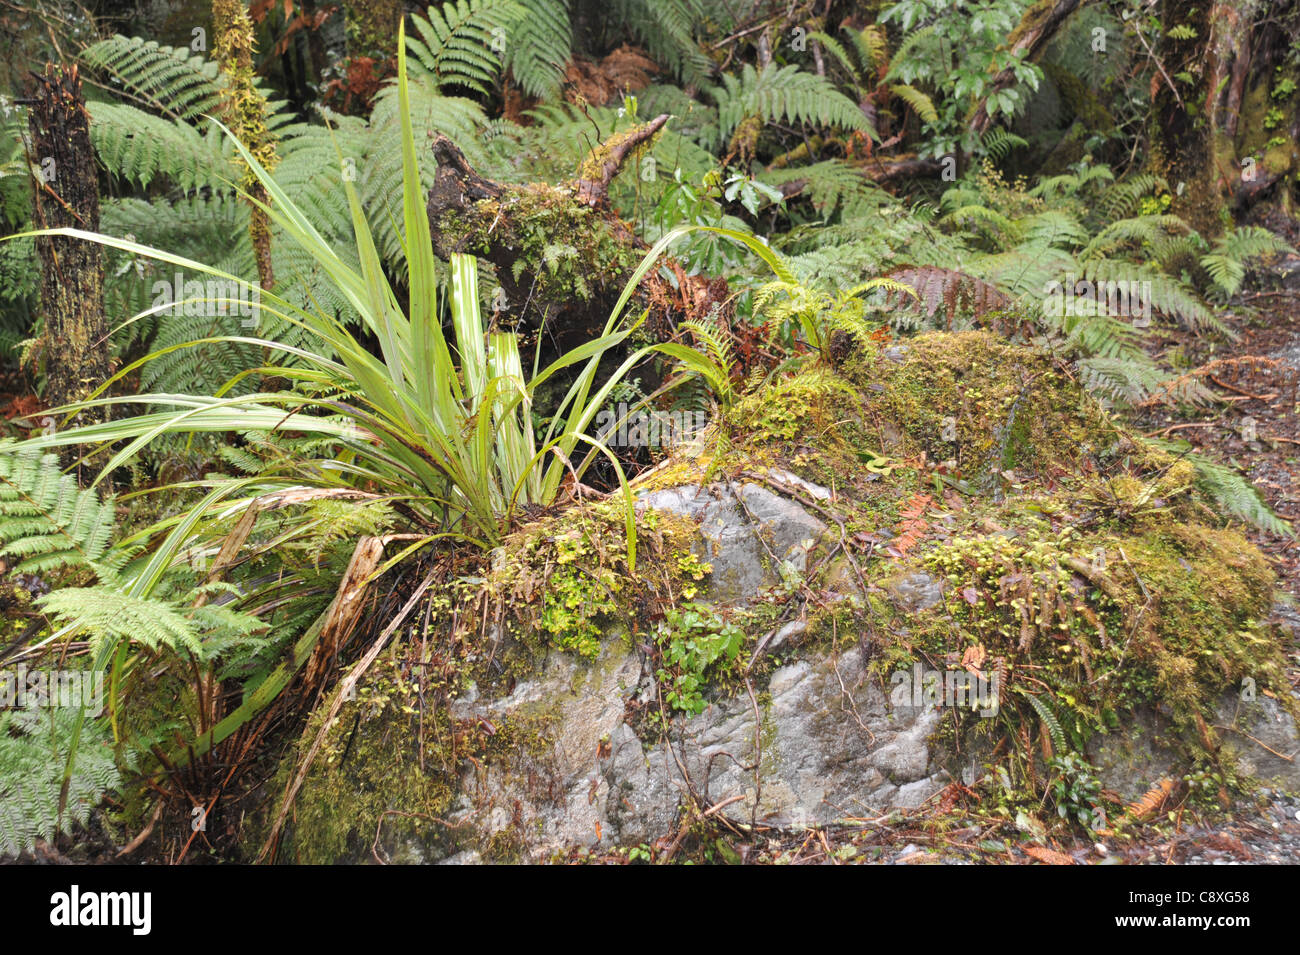 A mixture of vegetation grows in New Zealand’s temperate rainforests. The forest floor is festooned with mosses ferns, grasses, Stock Photo